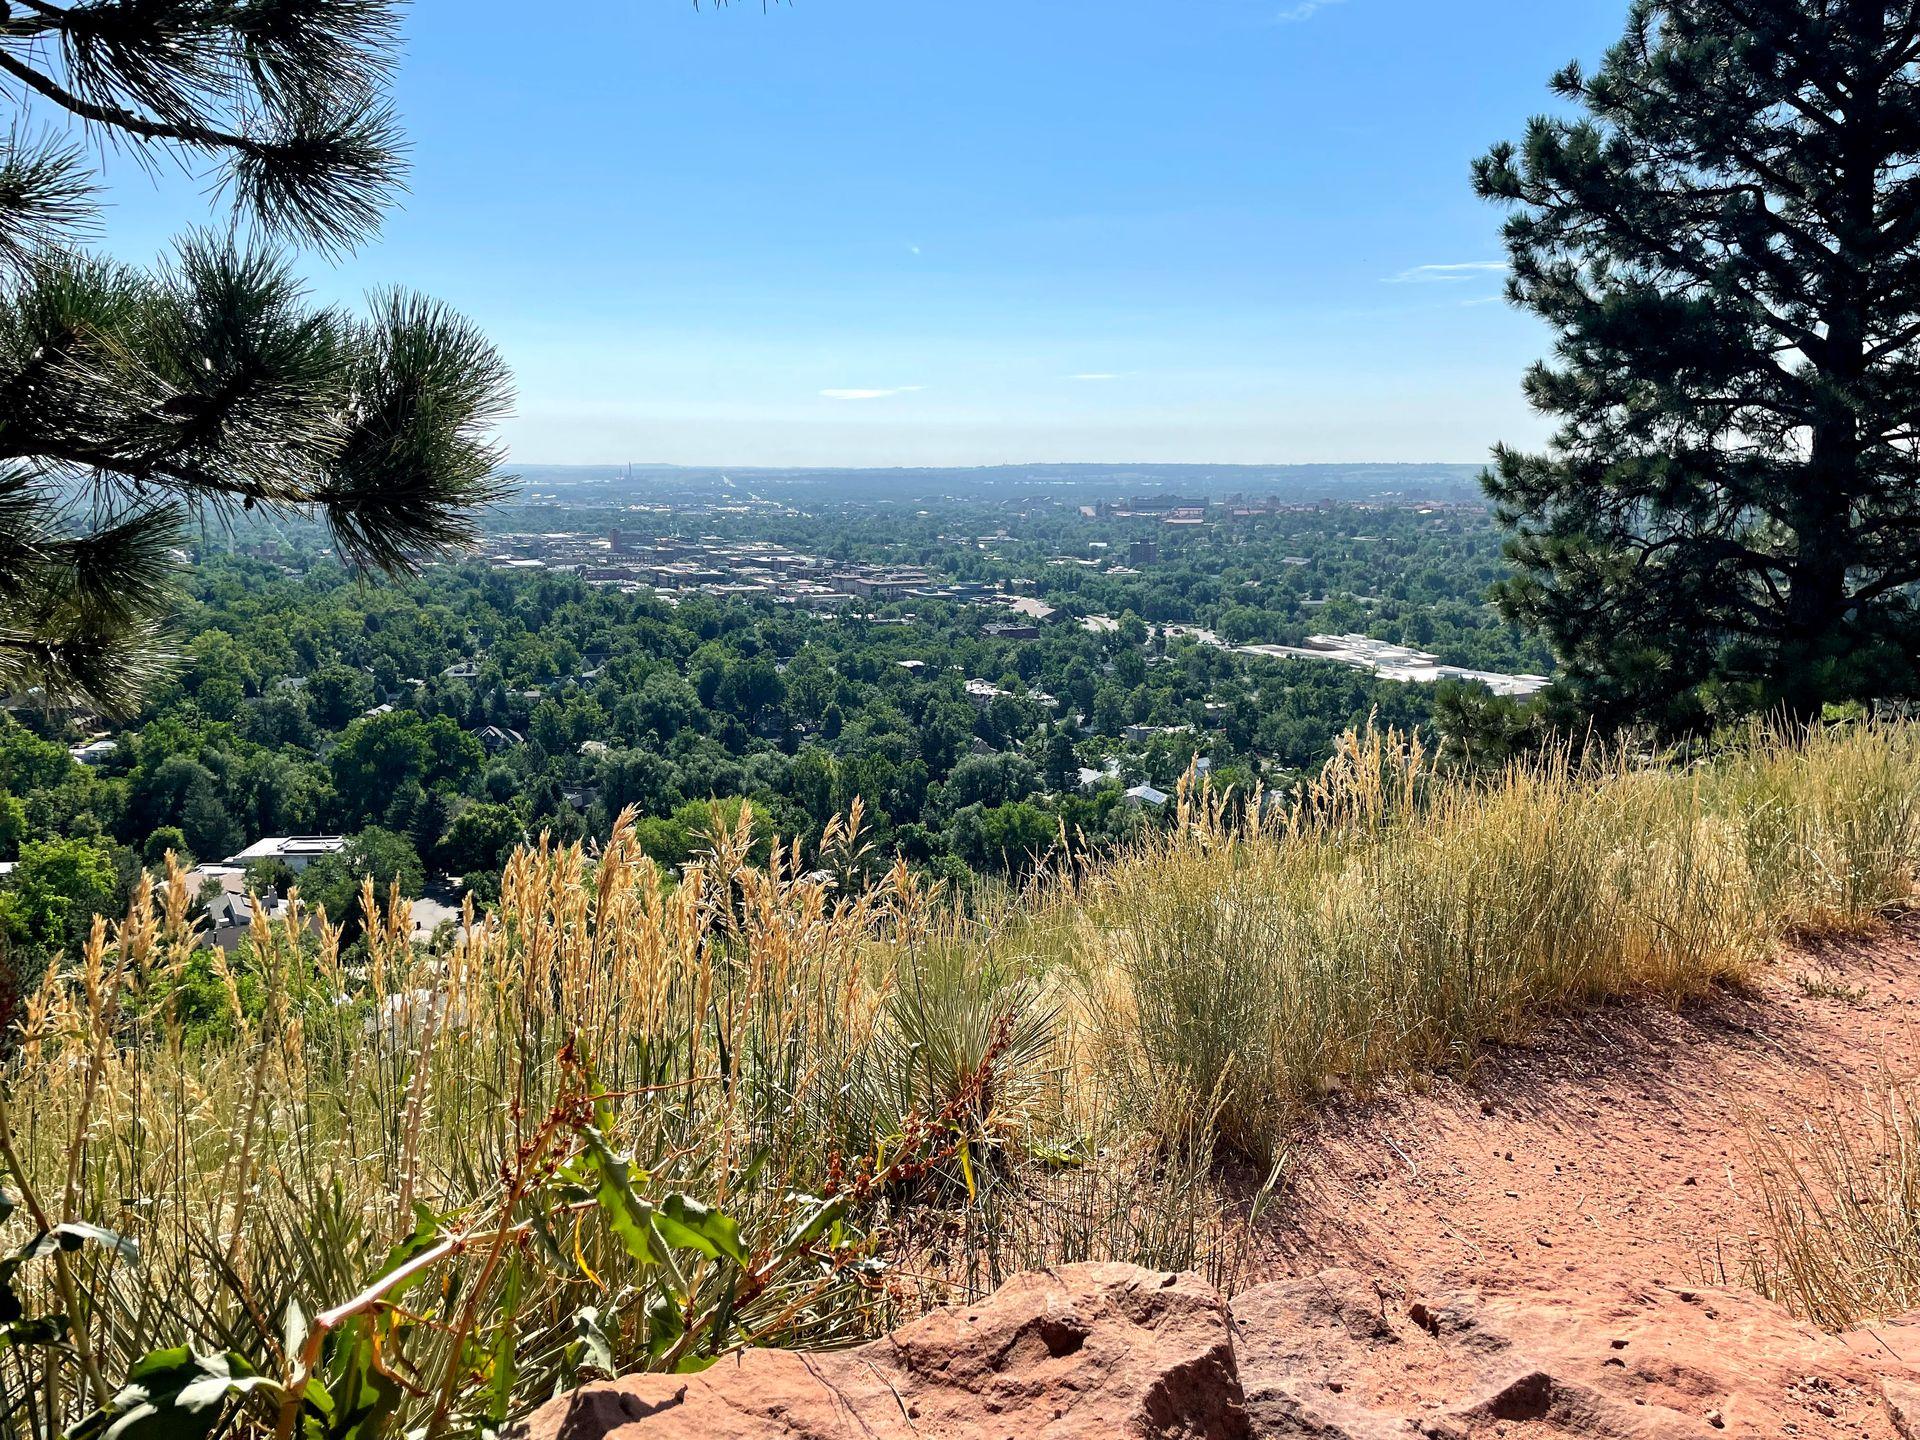 A view overlooking the city from the Red Rocks park near town.